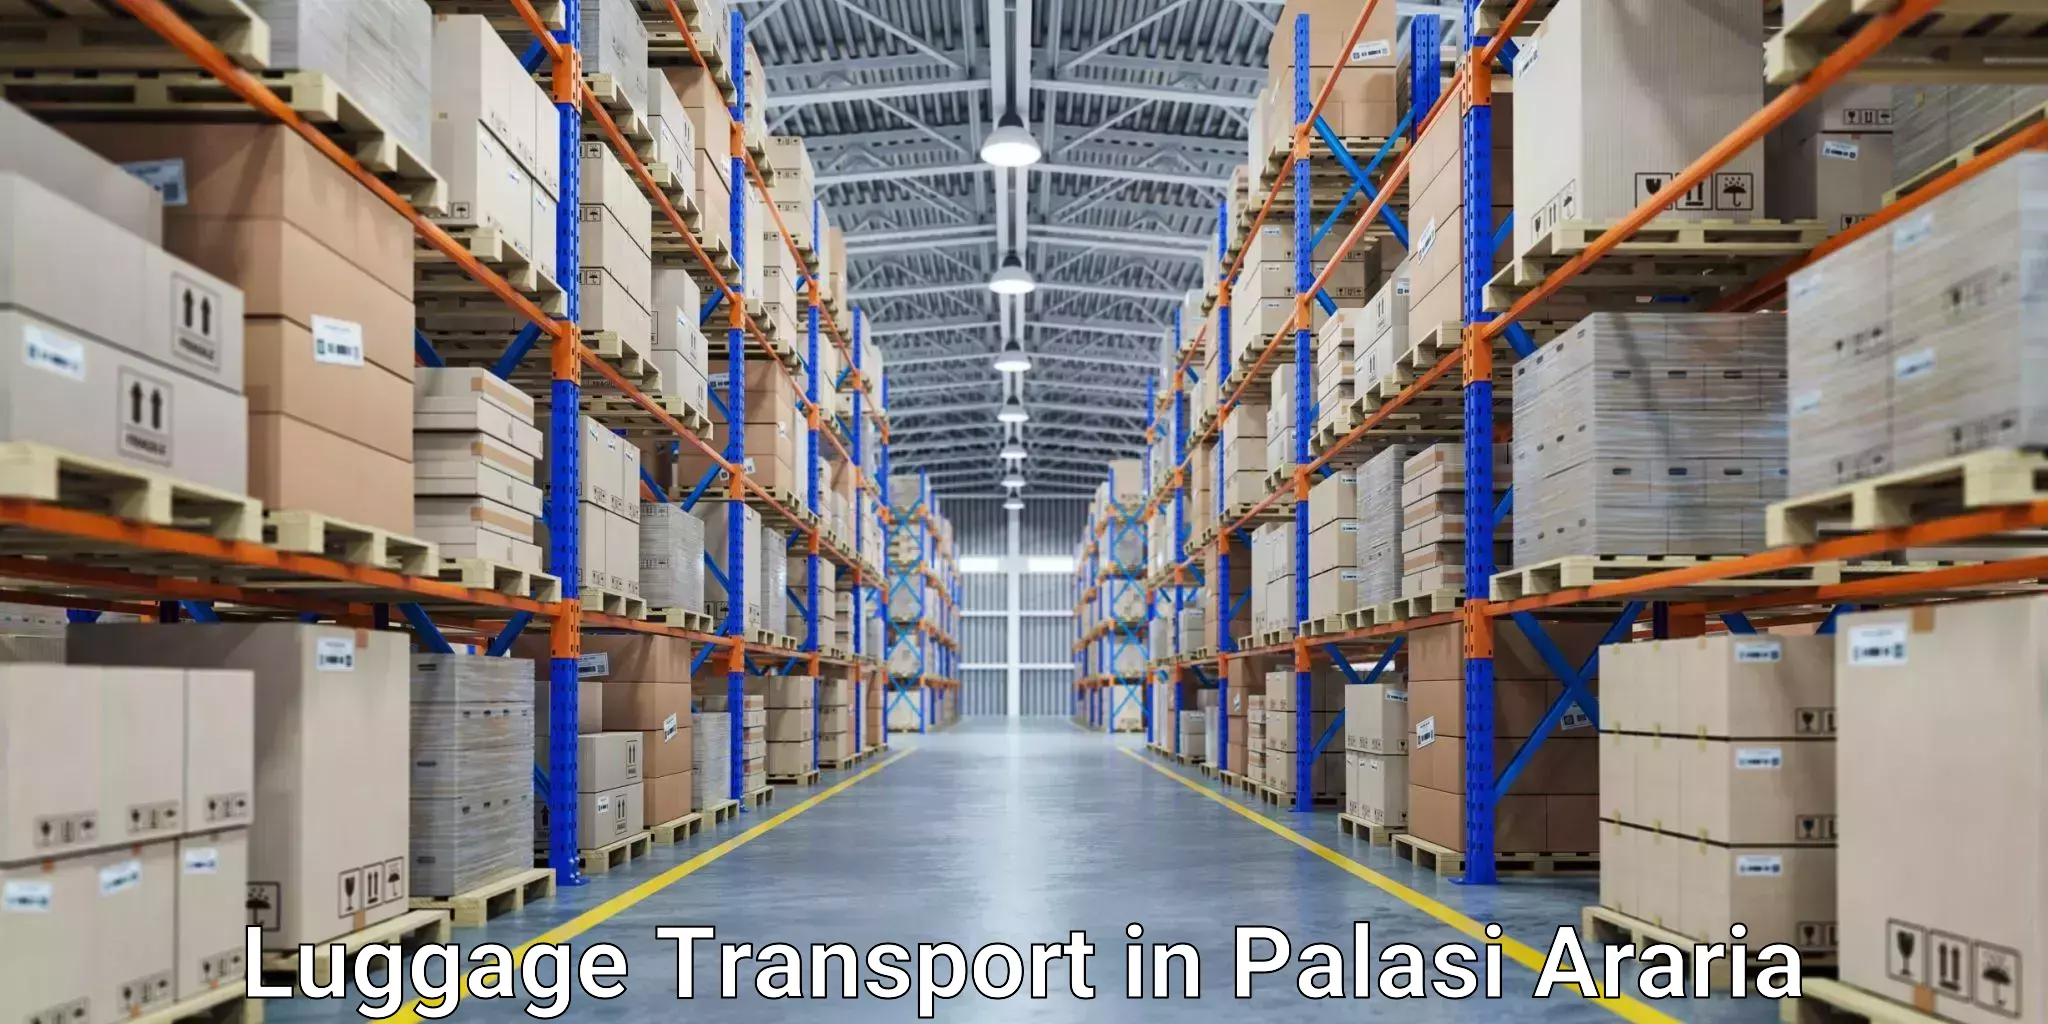 Luggage transport deals in Palasi Araria